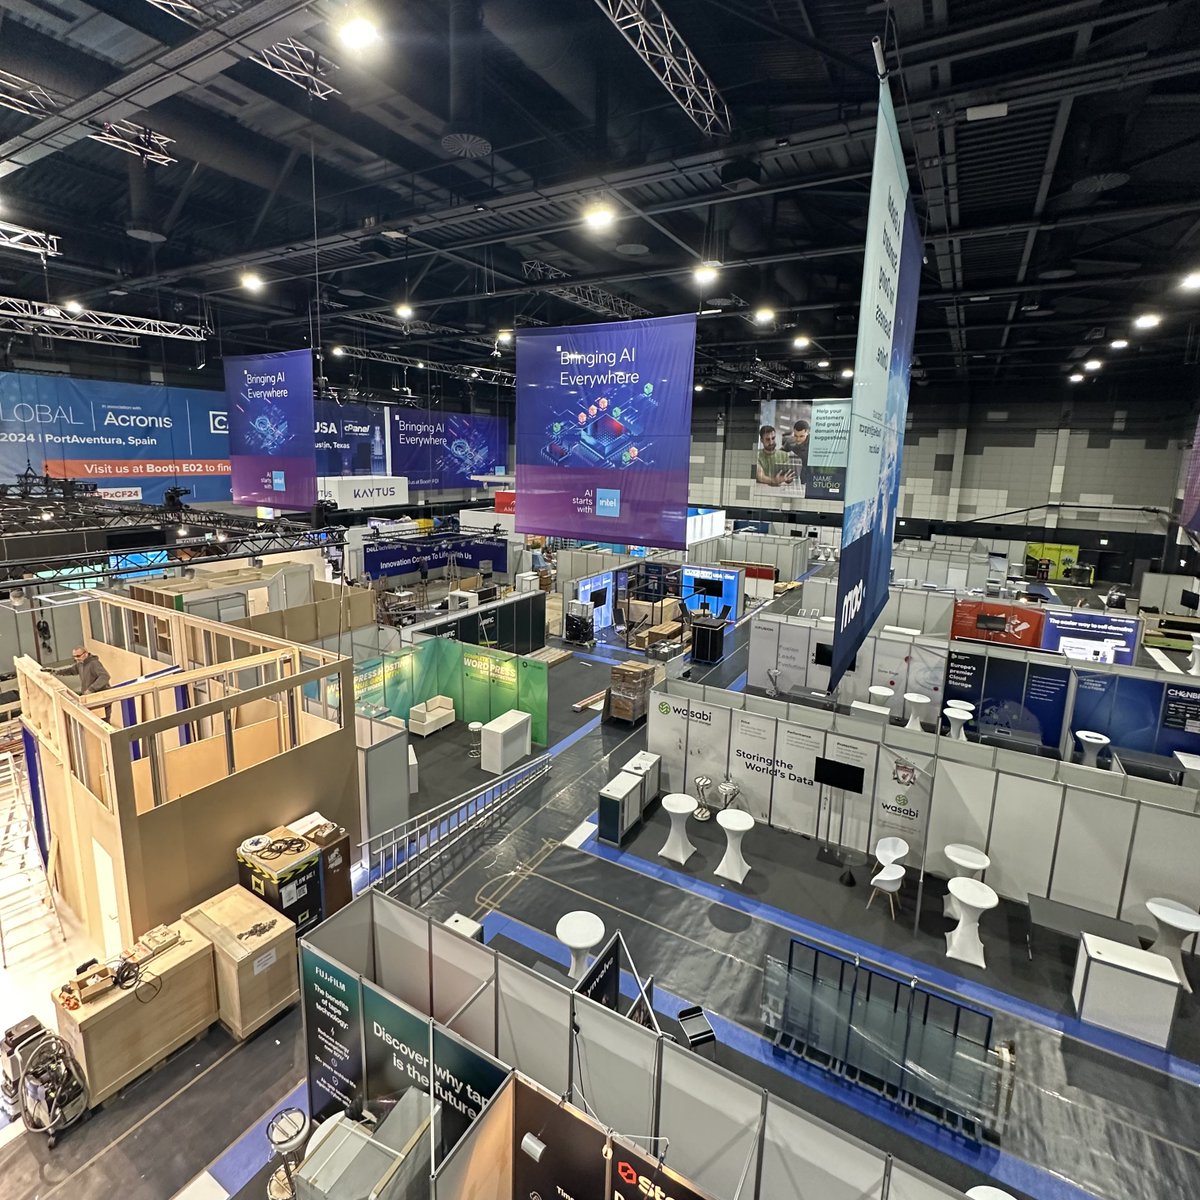 🏙️ Like a small city built just for the CloudFest community, the Cloud Fair powered by @intel is coming to life! 🌐 Thousands of internet infrastructure decision-makers will soon be walking these halls. The 20th Anniversary of CloudFest is going to be amazing!